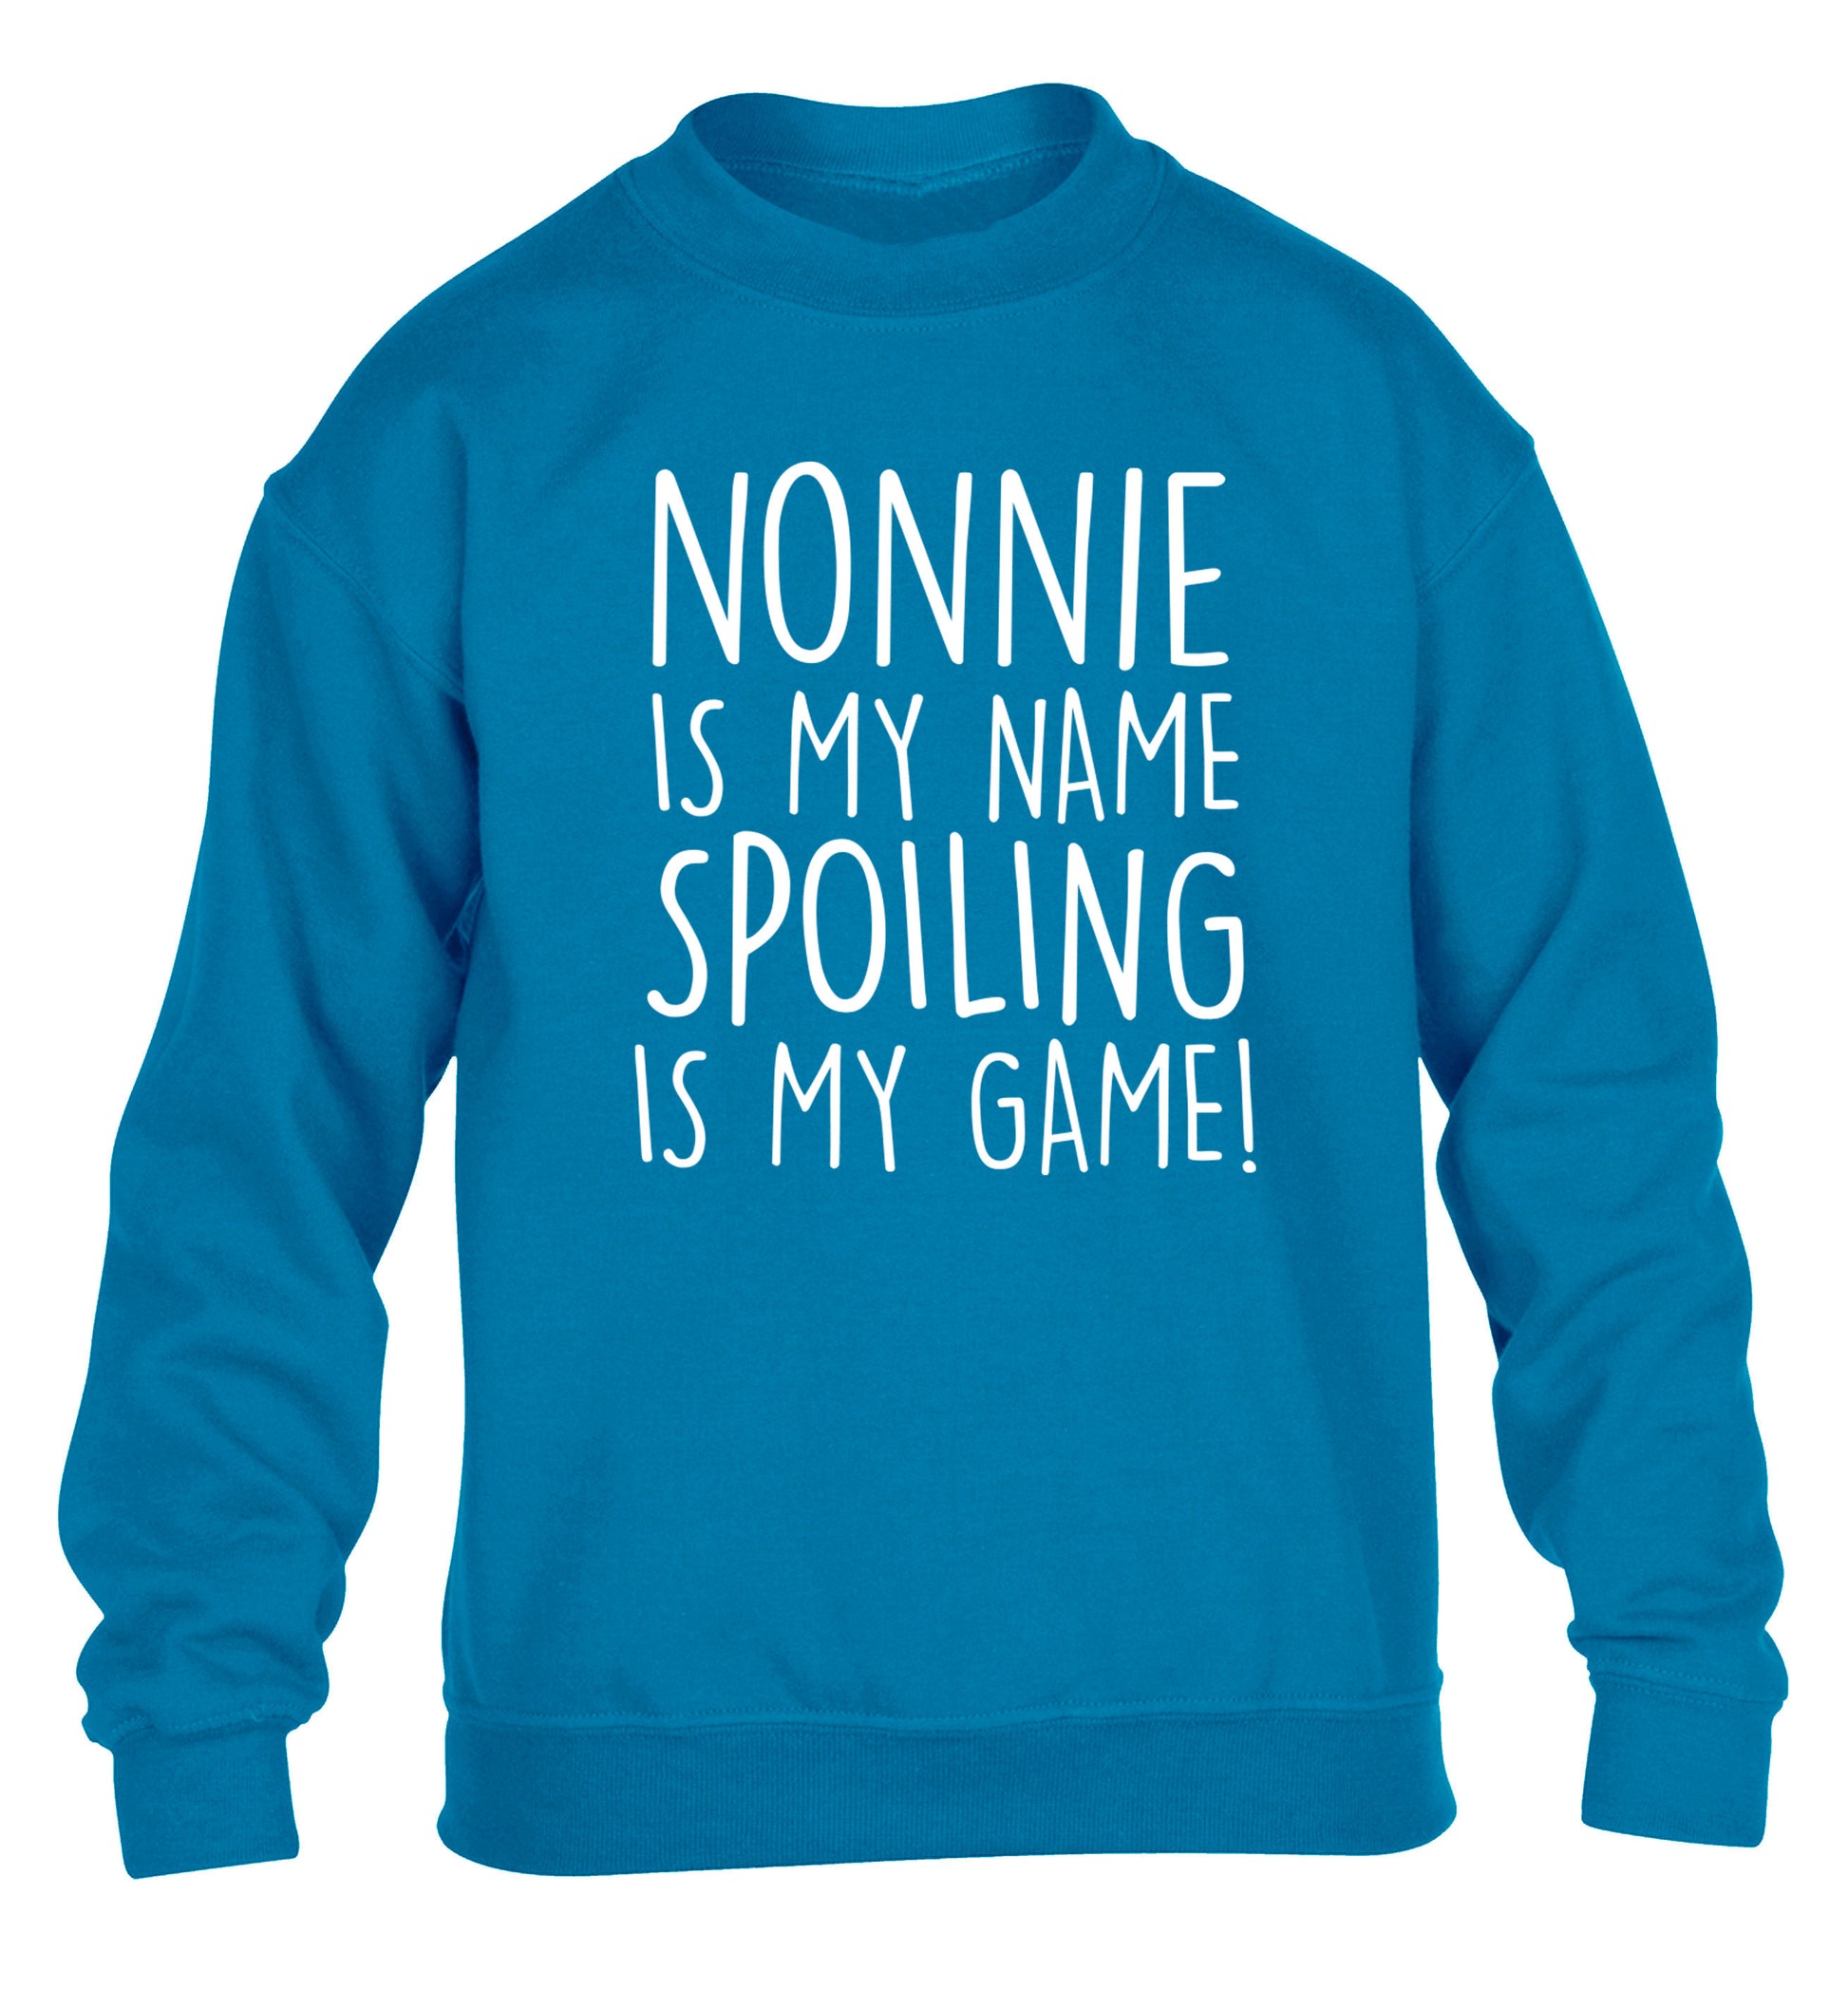 Nonnie is my name, spoiling is my game children's blue sweater 12-14 Years